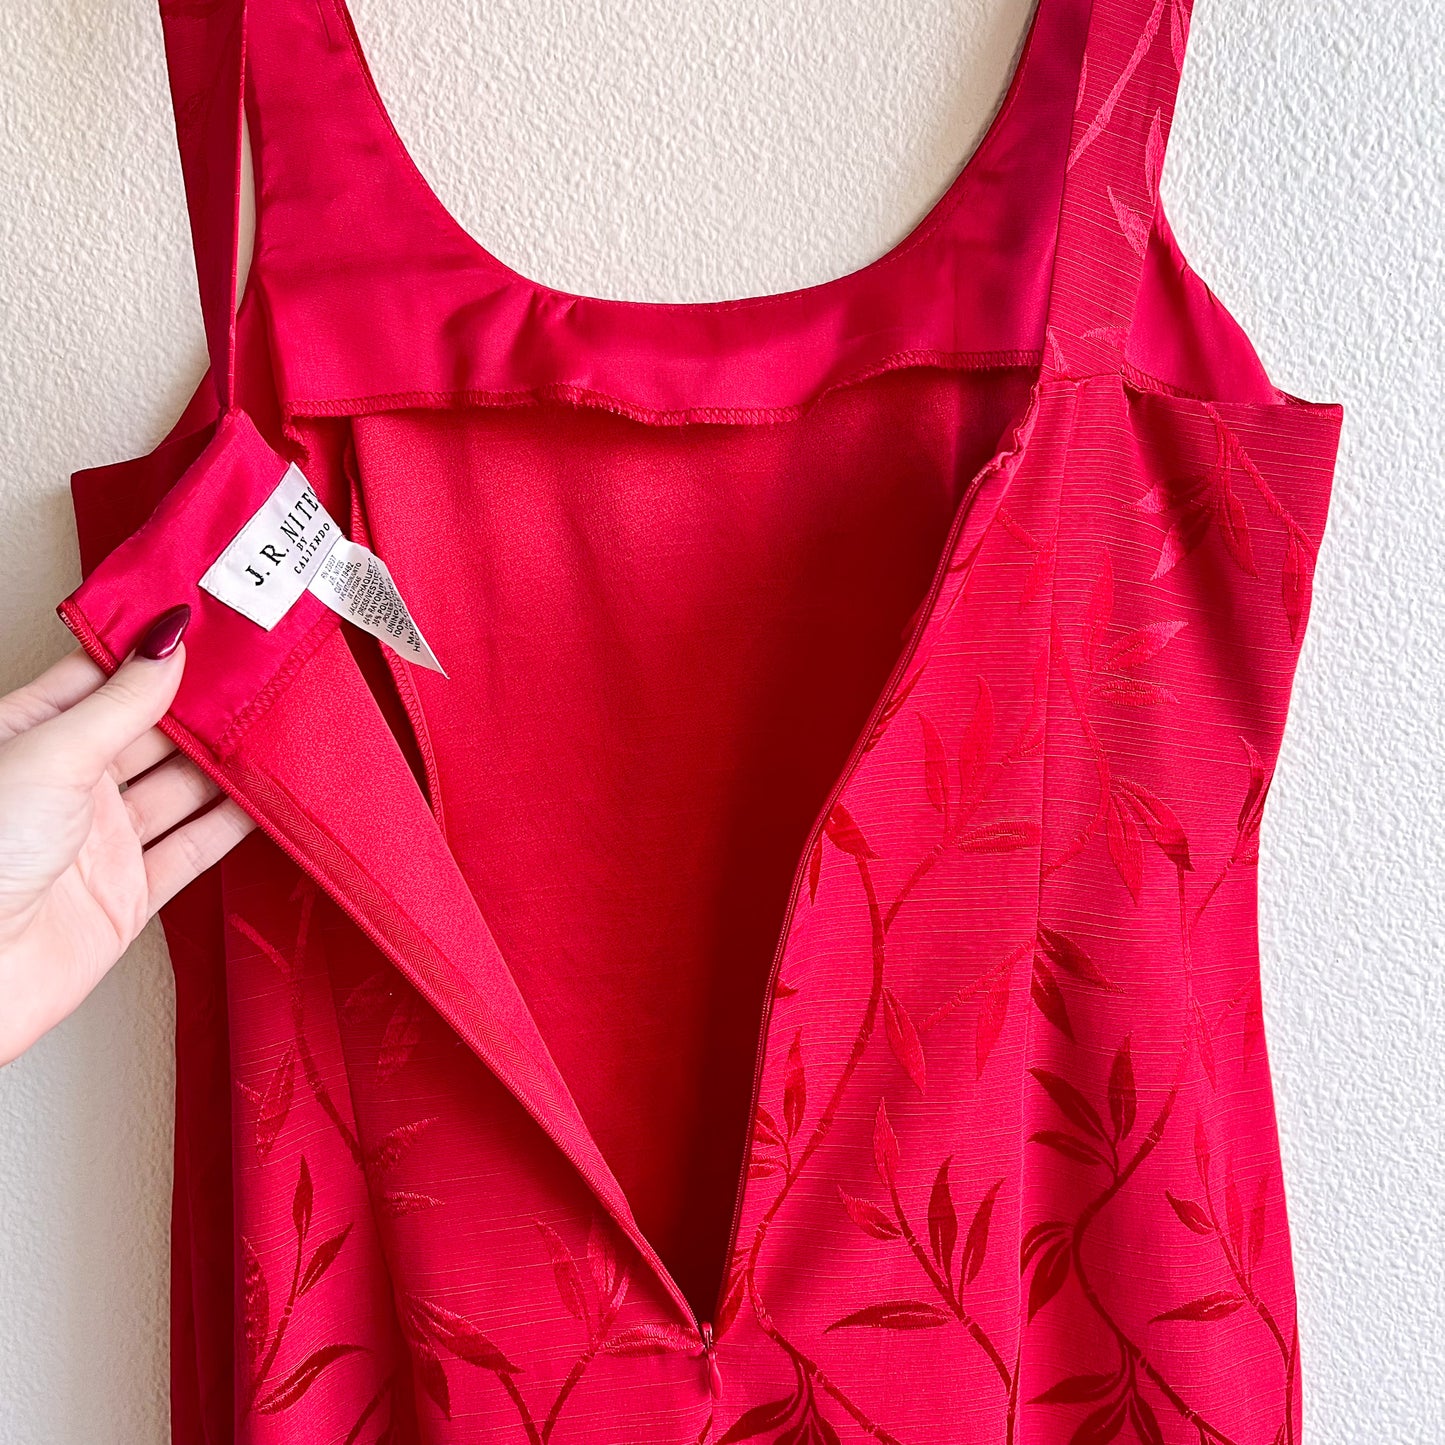 1990s Bright Red Slit Dress With Cropped Jacket (M/L)